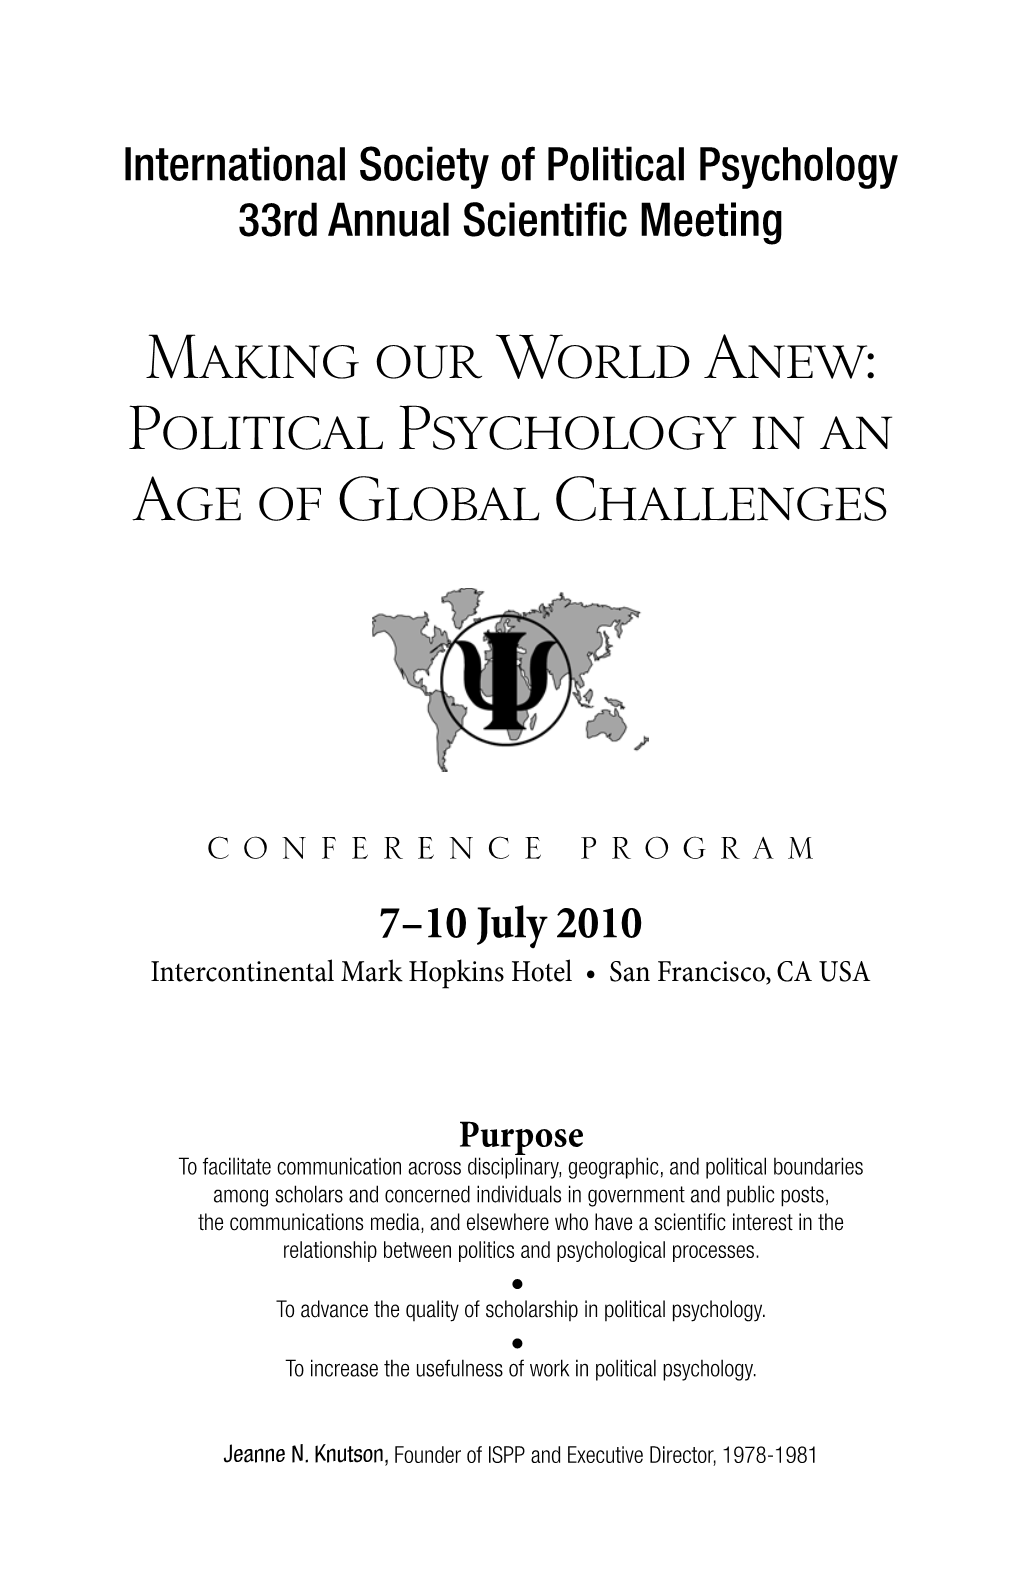 Making Our World Anew: Political Psychology in an Age of Global Challenges